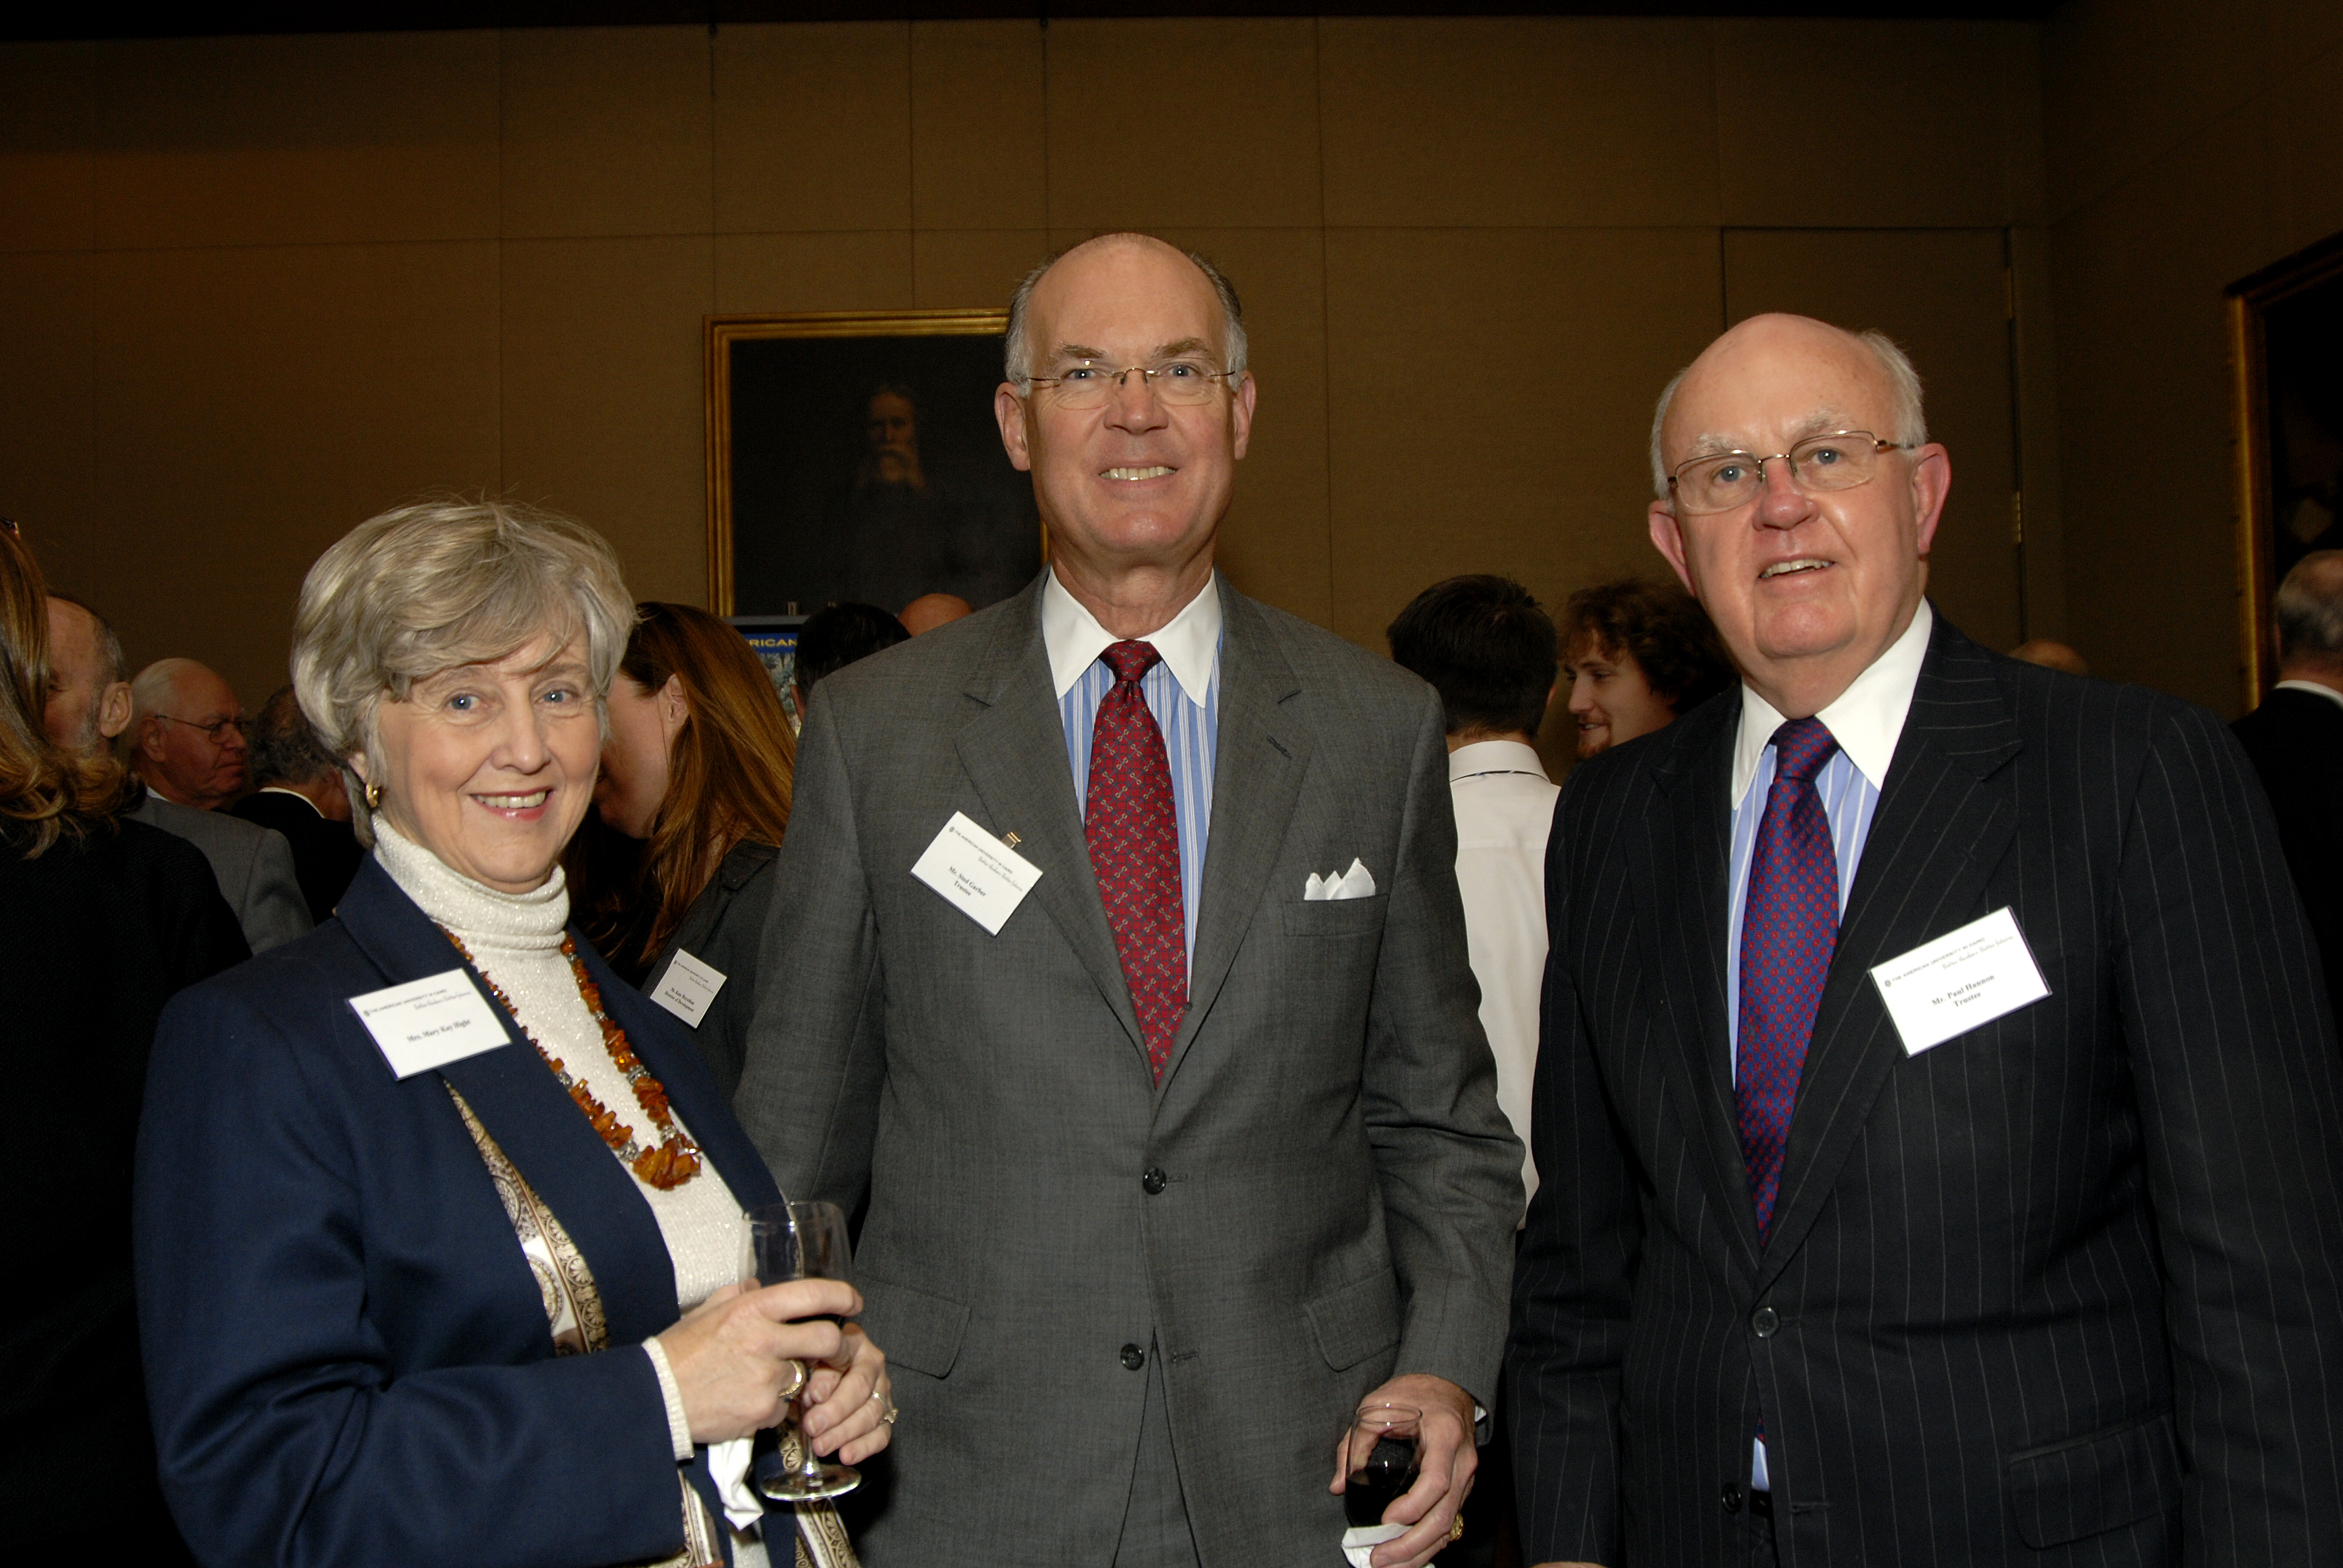 Hannon and two other trustees at AUC Chairman's reception - Harvard Club in New York City November 2006